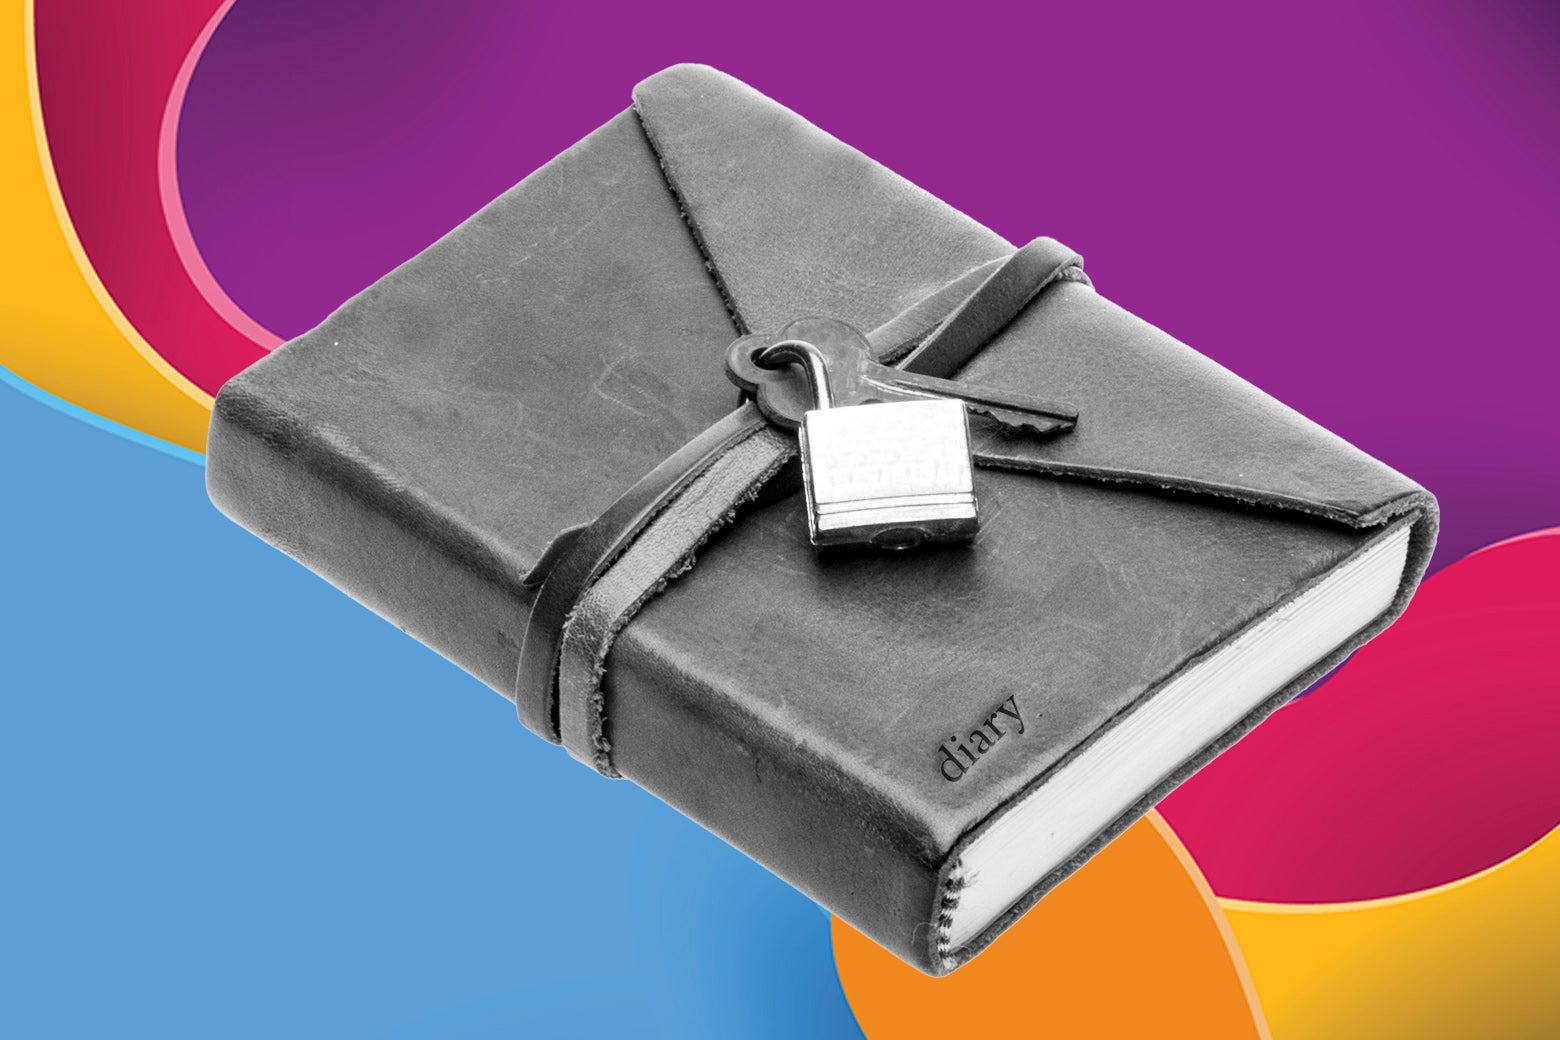 A leatherbound diary with a lock on it against the colorful One Thing background.